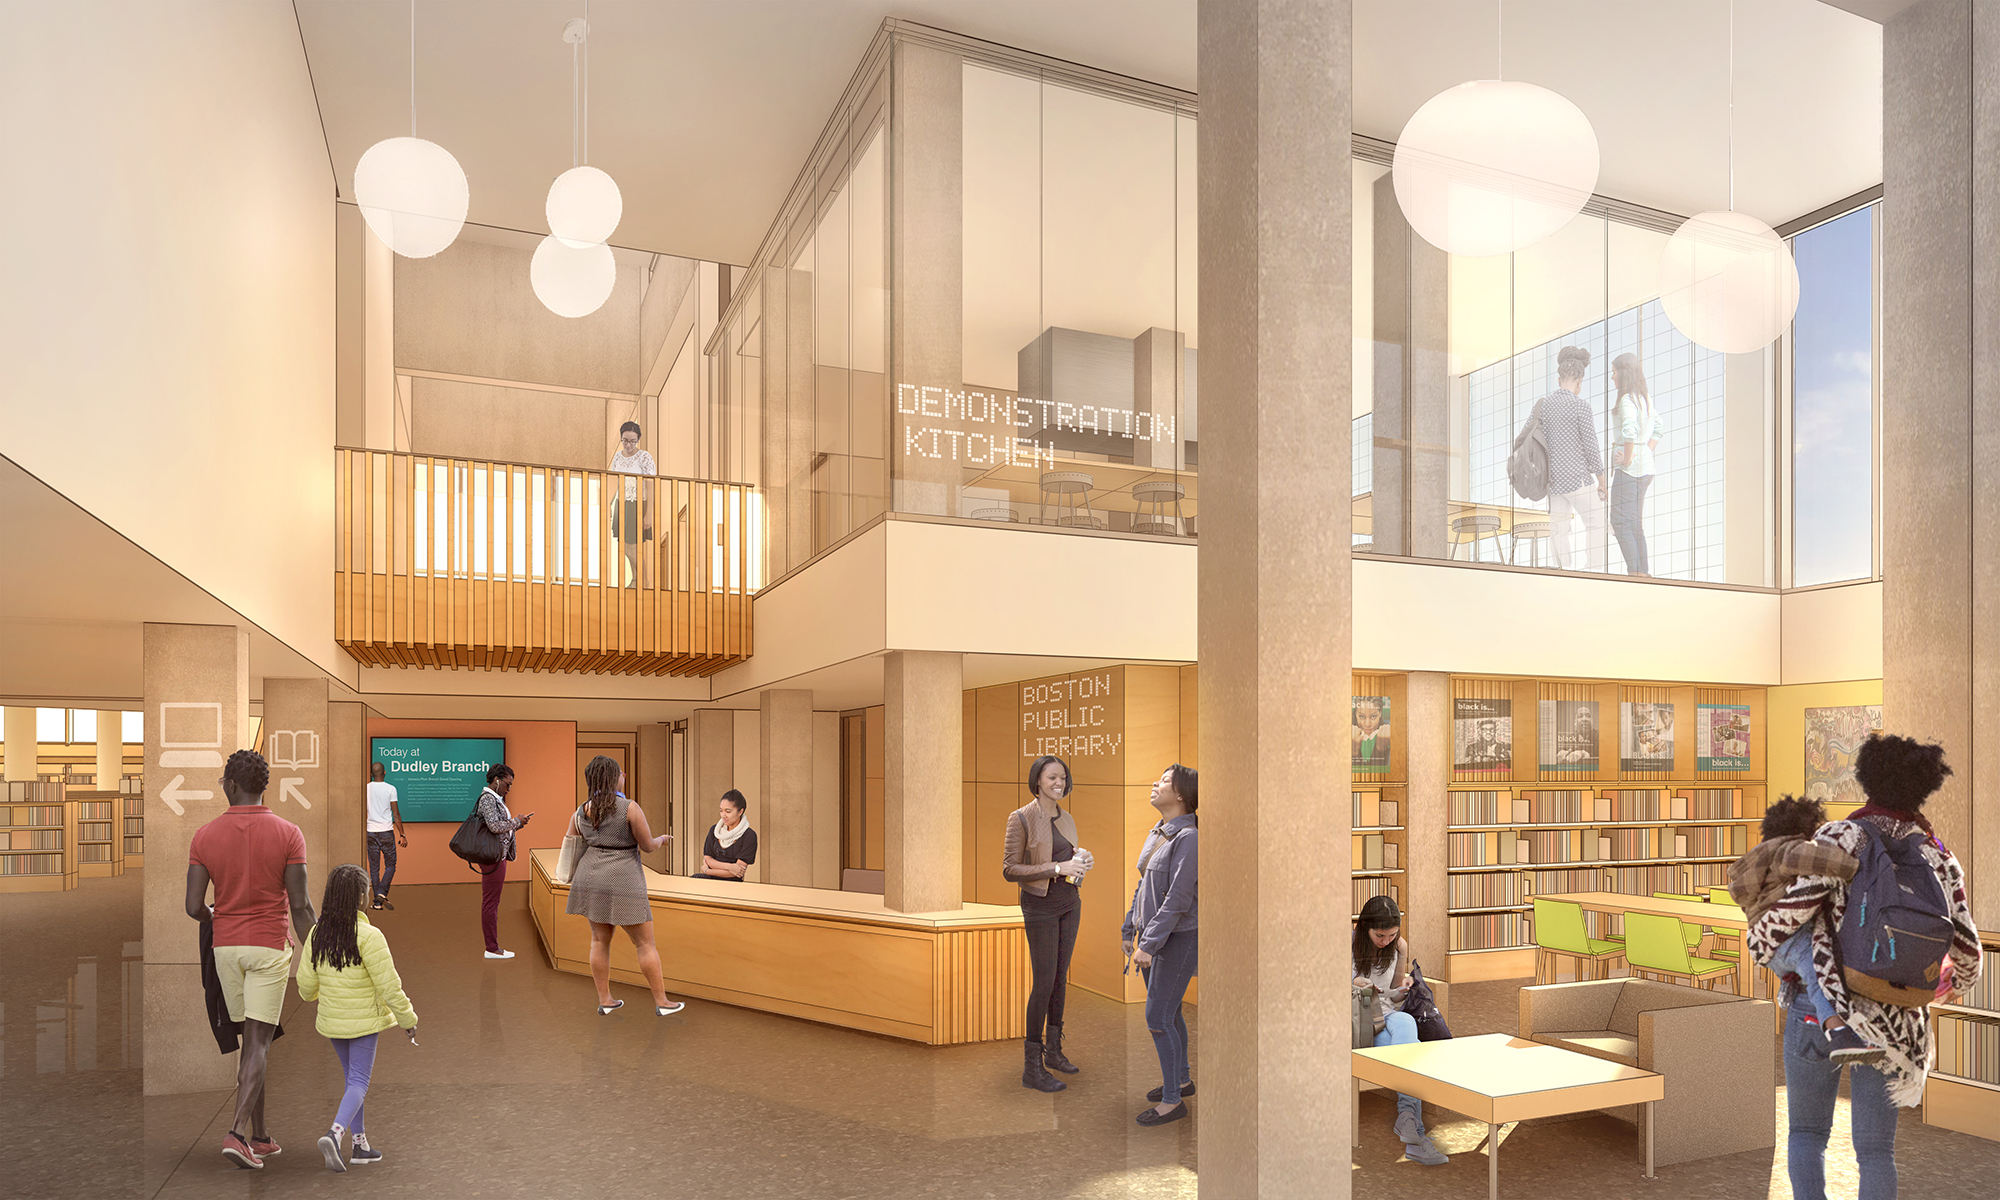 Join us for Saturday’s Renovation Kickoff for the Dudley Branch of the Boston Public Library!